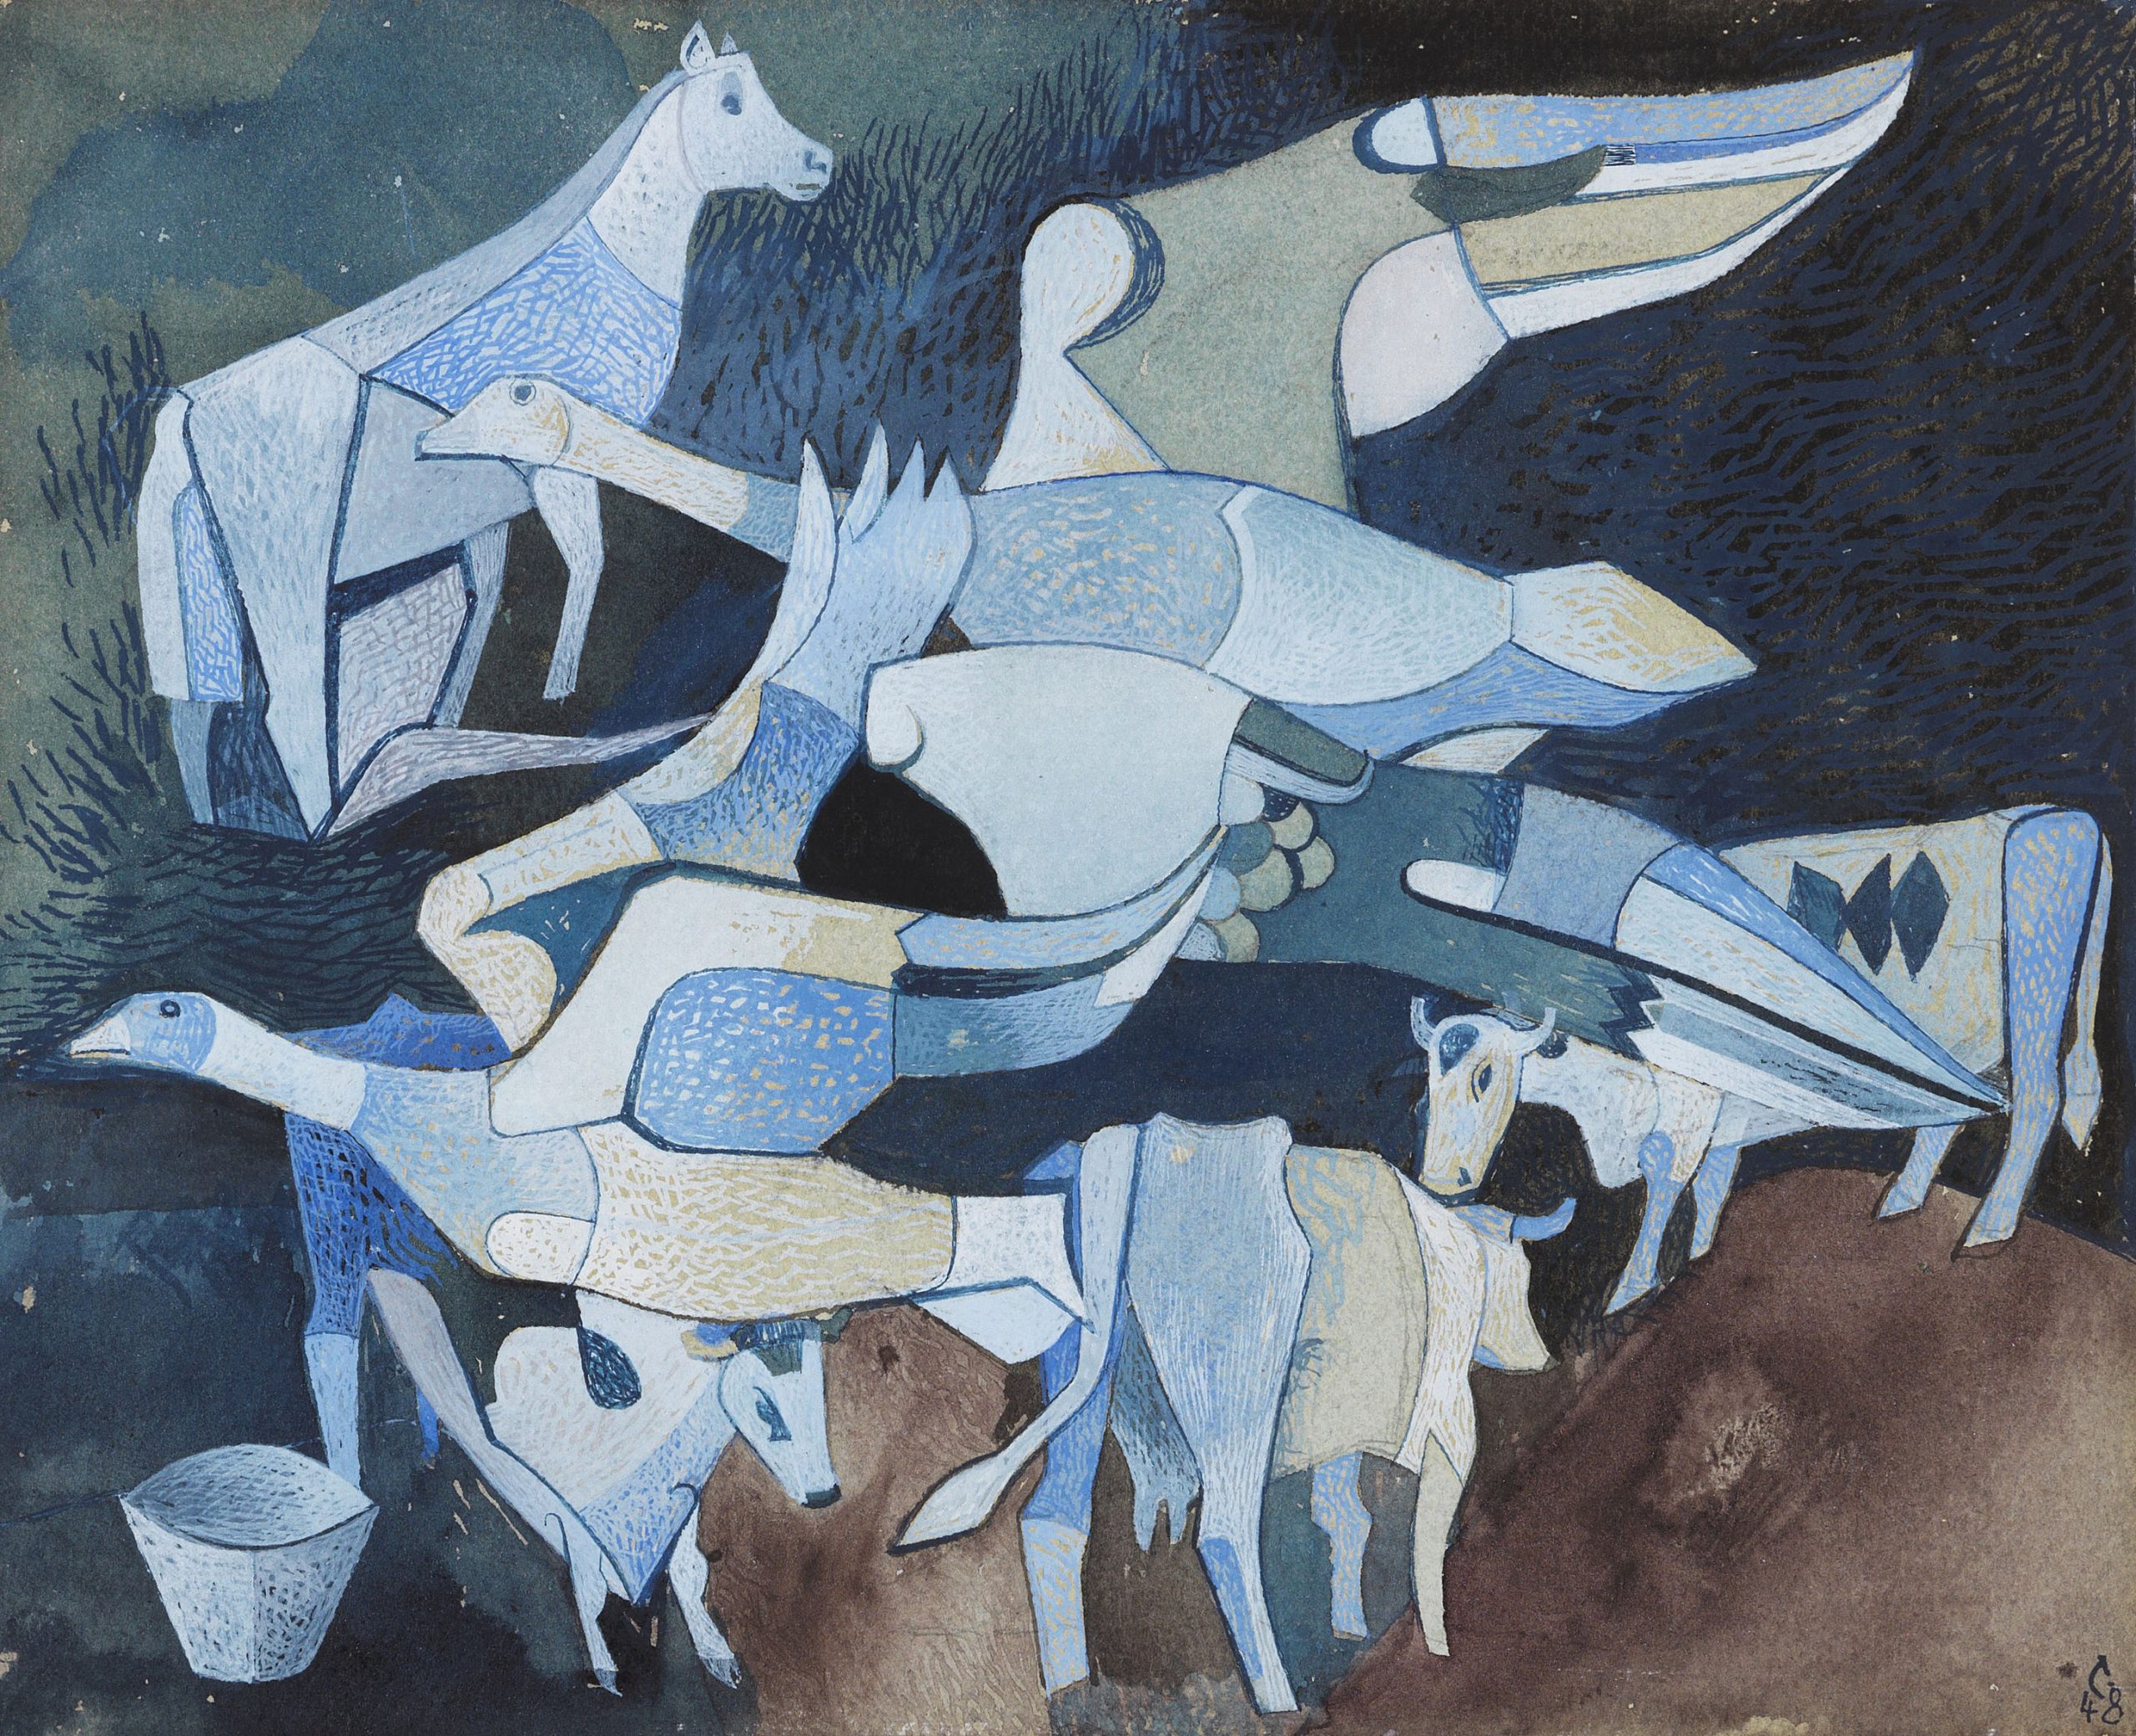 Heinrich Campendonk – Cows and Geese (1948)